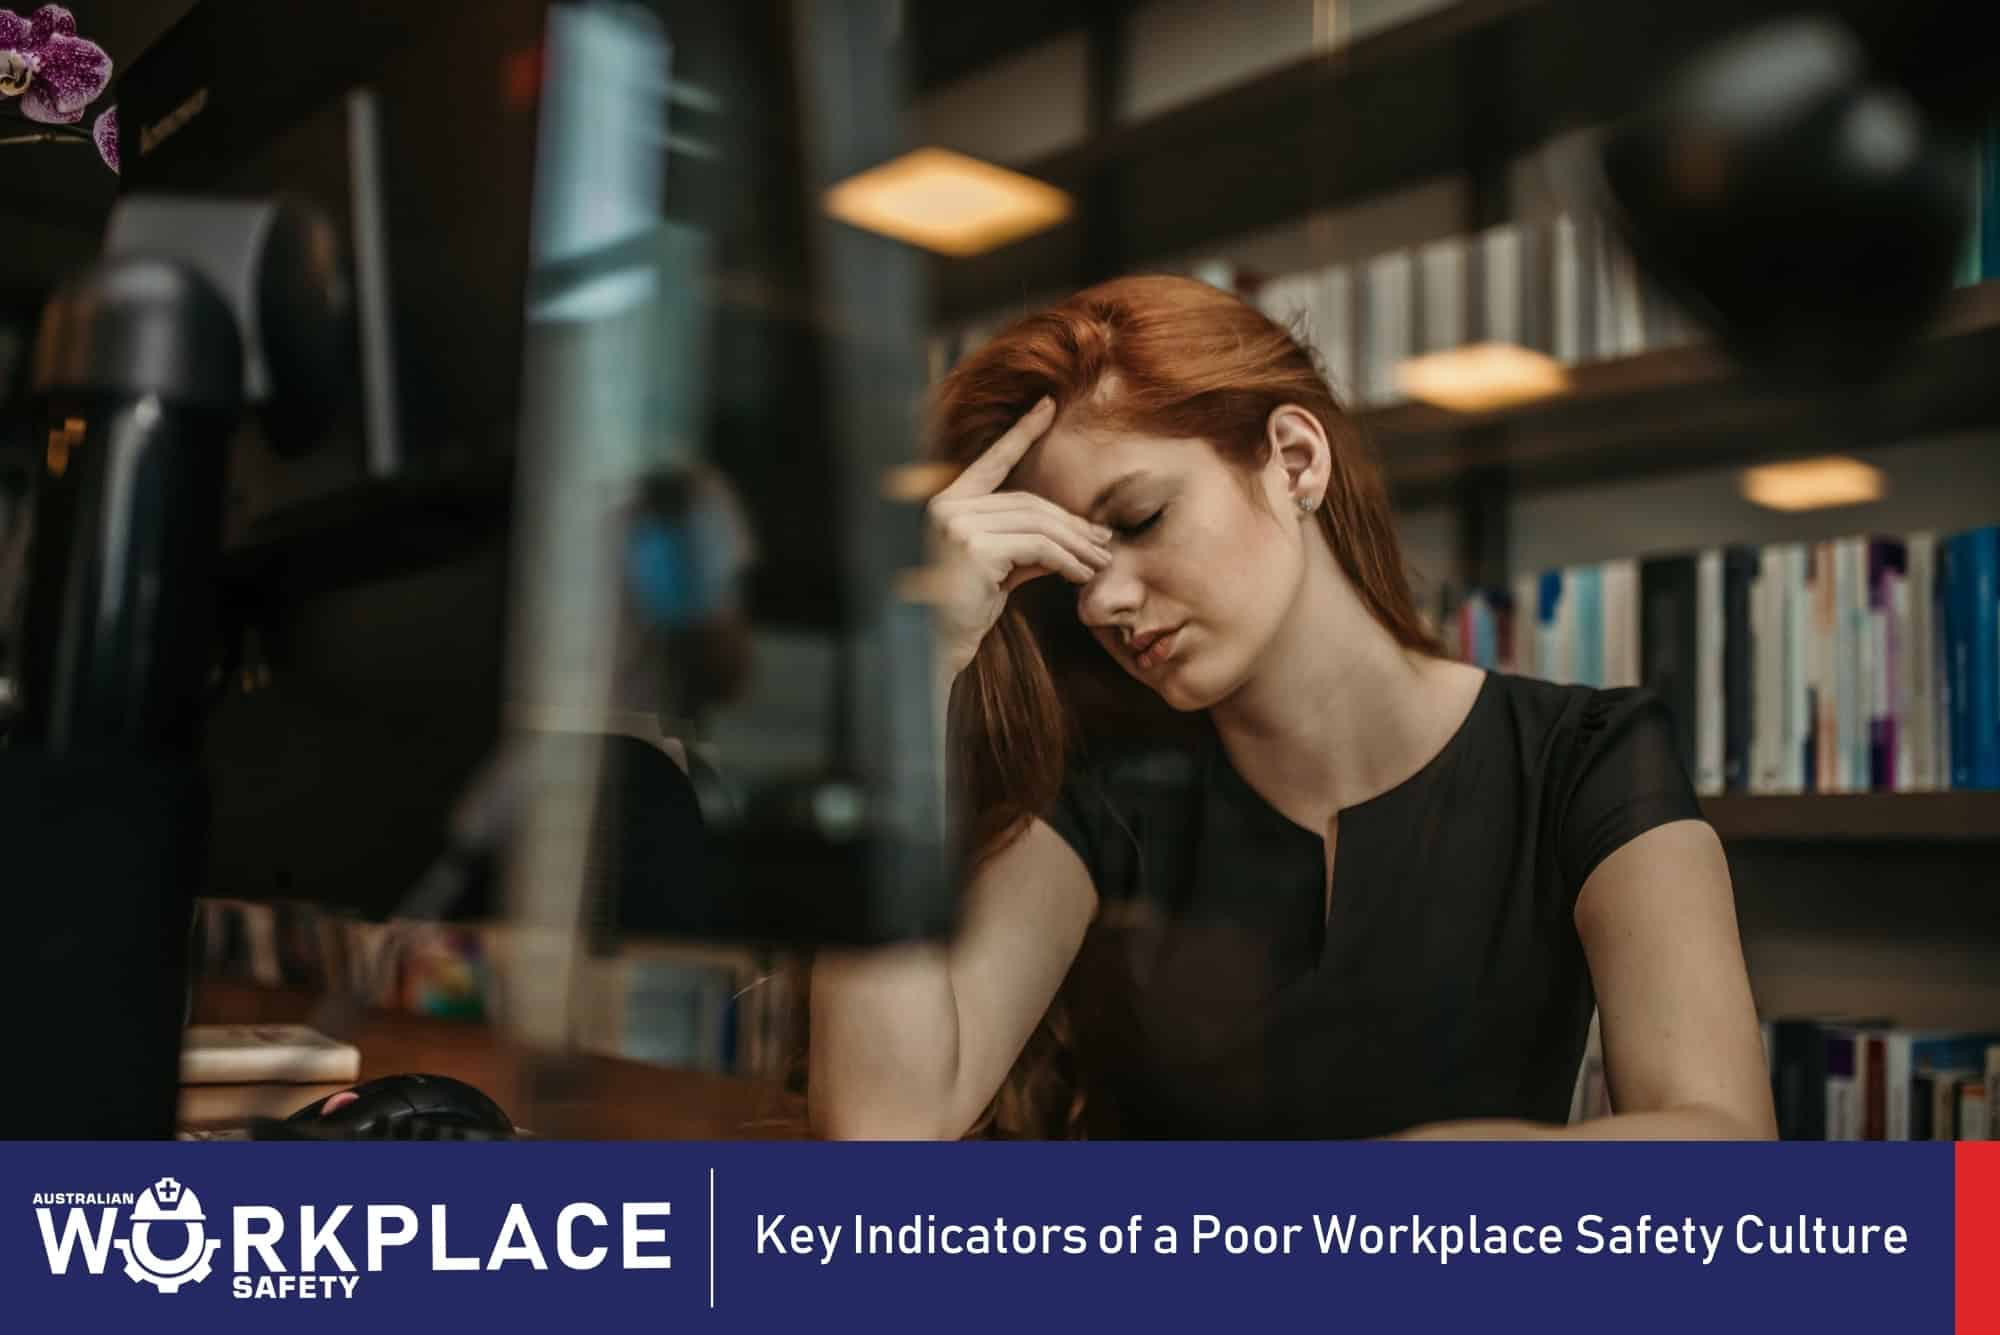 Key Indicators of a Poor Workplace Safety Culture